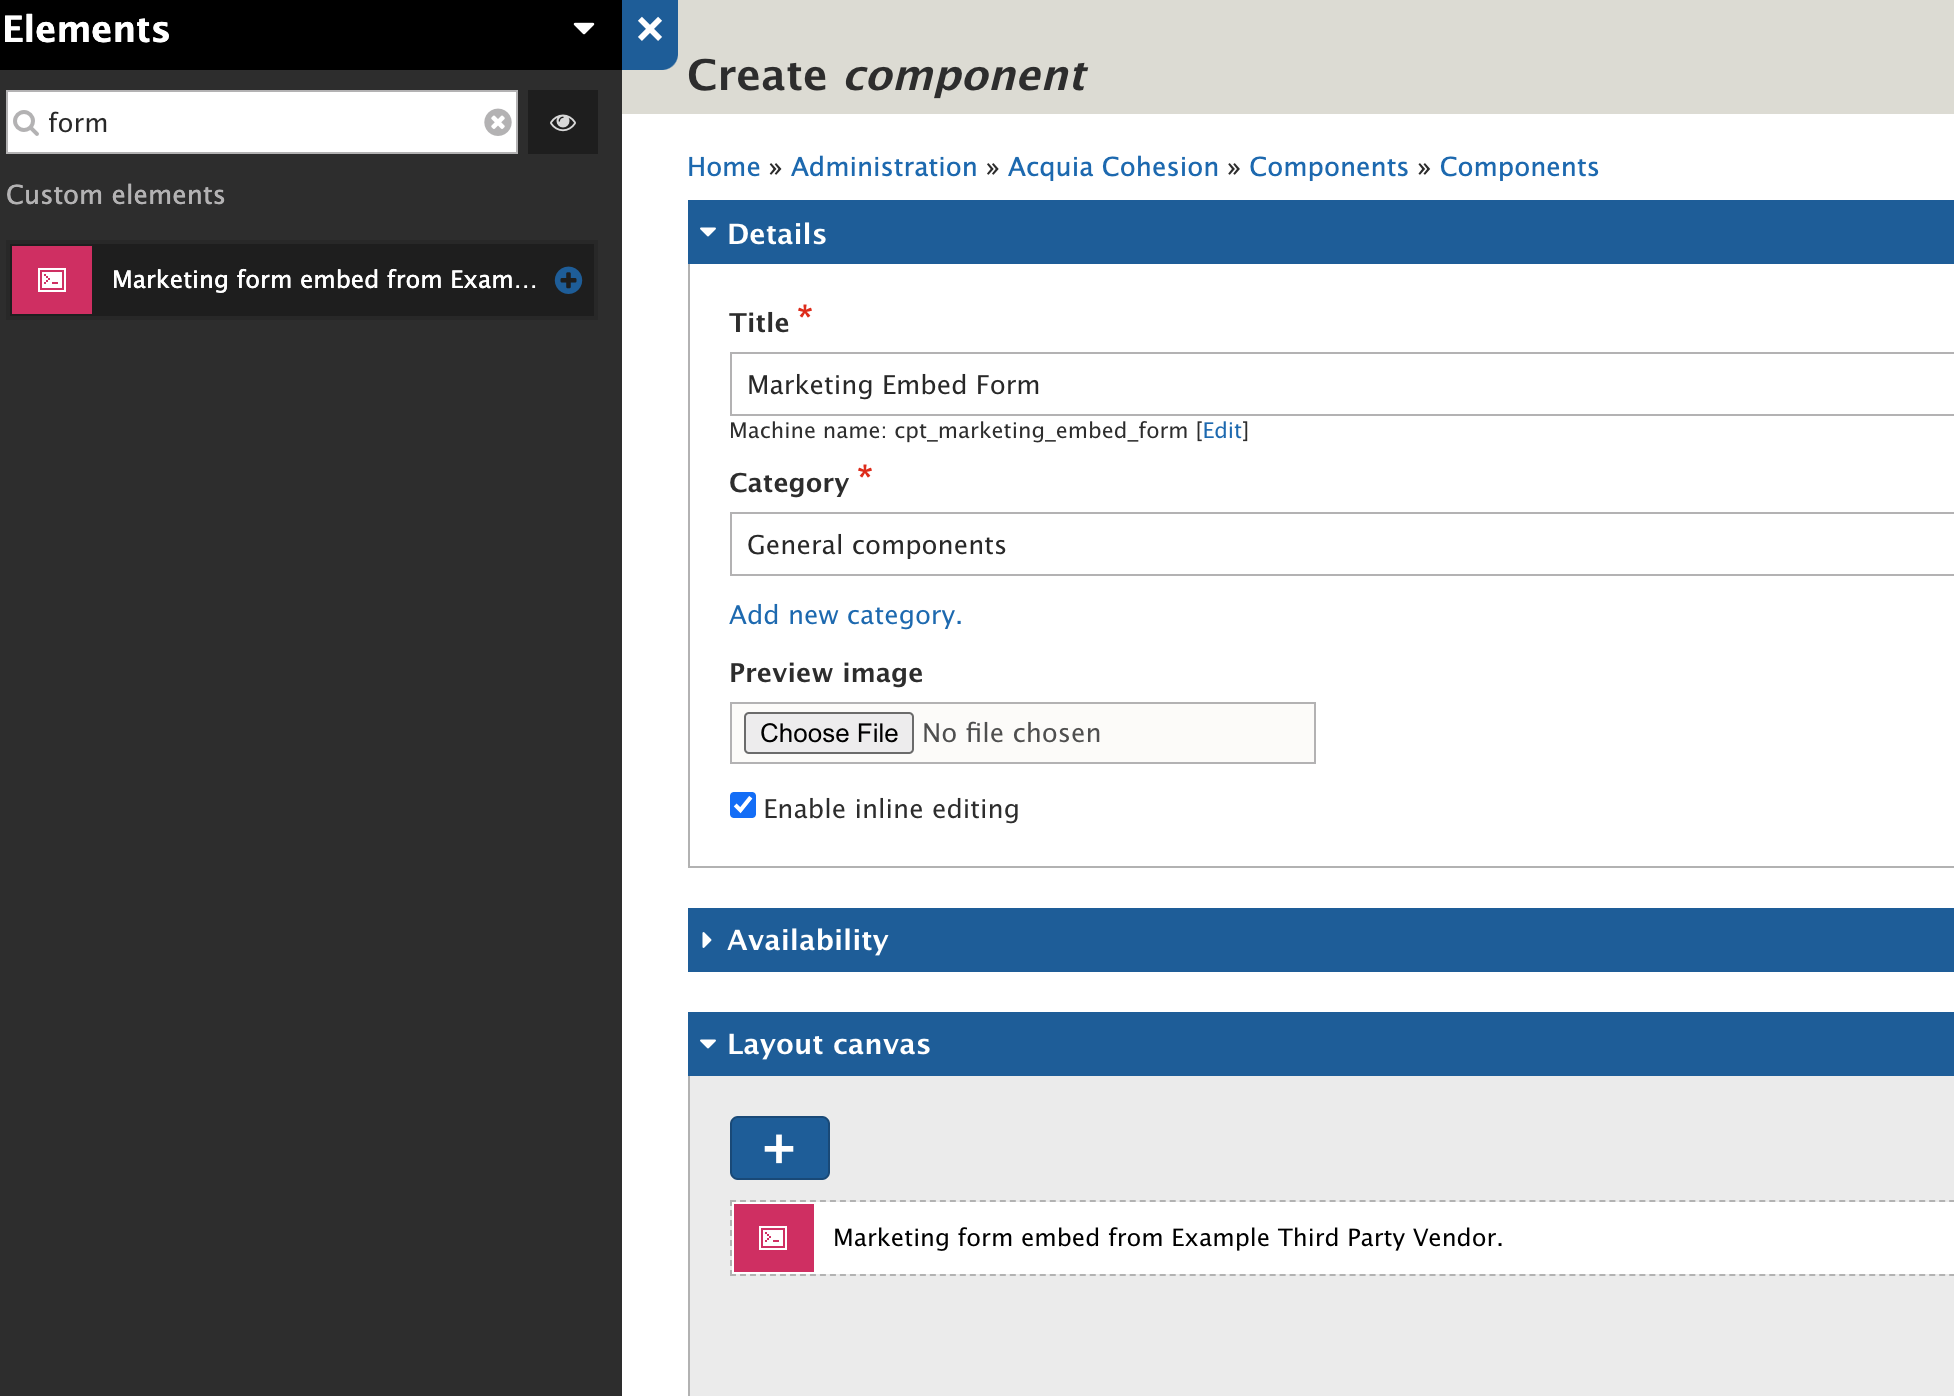 A screenshot of the "Create component" window in Acquia showing how you could create a Marketing Embed Form.